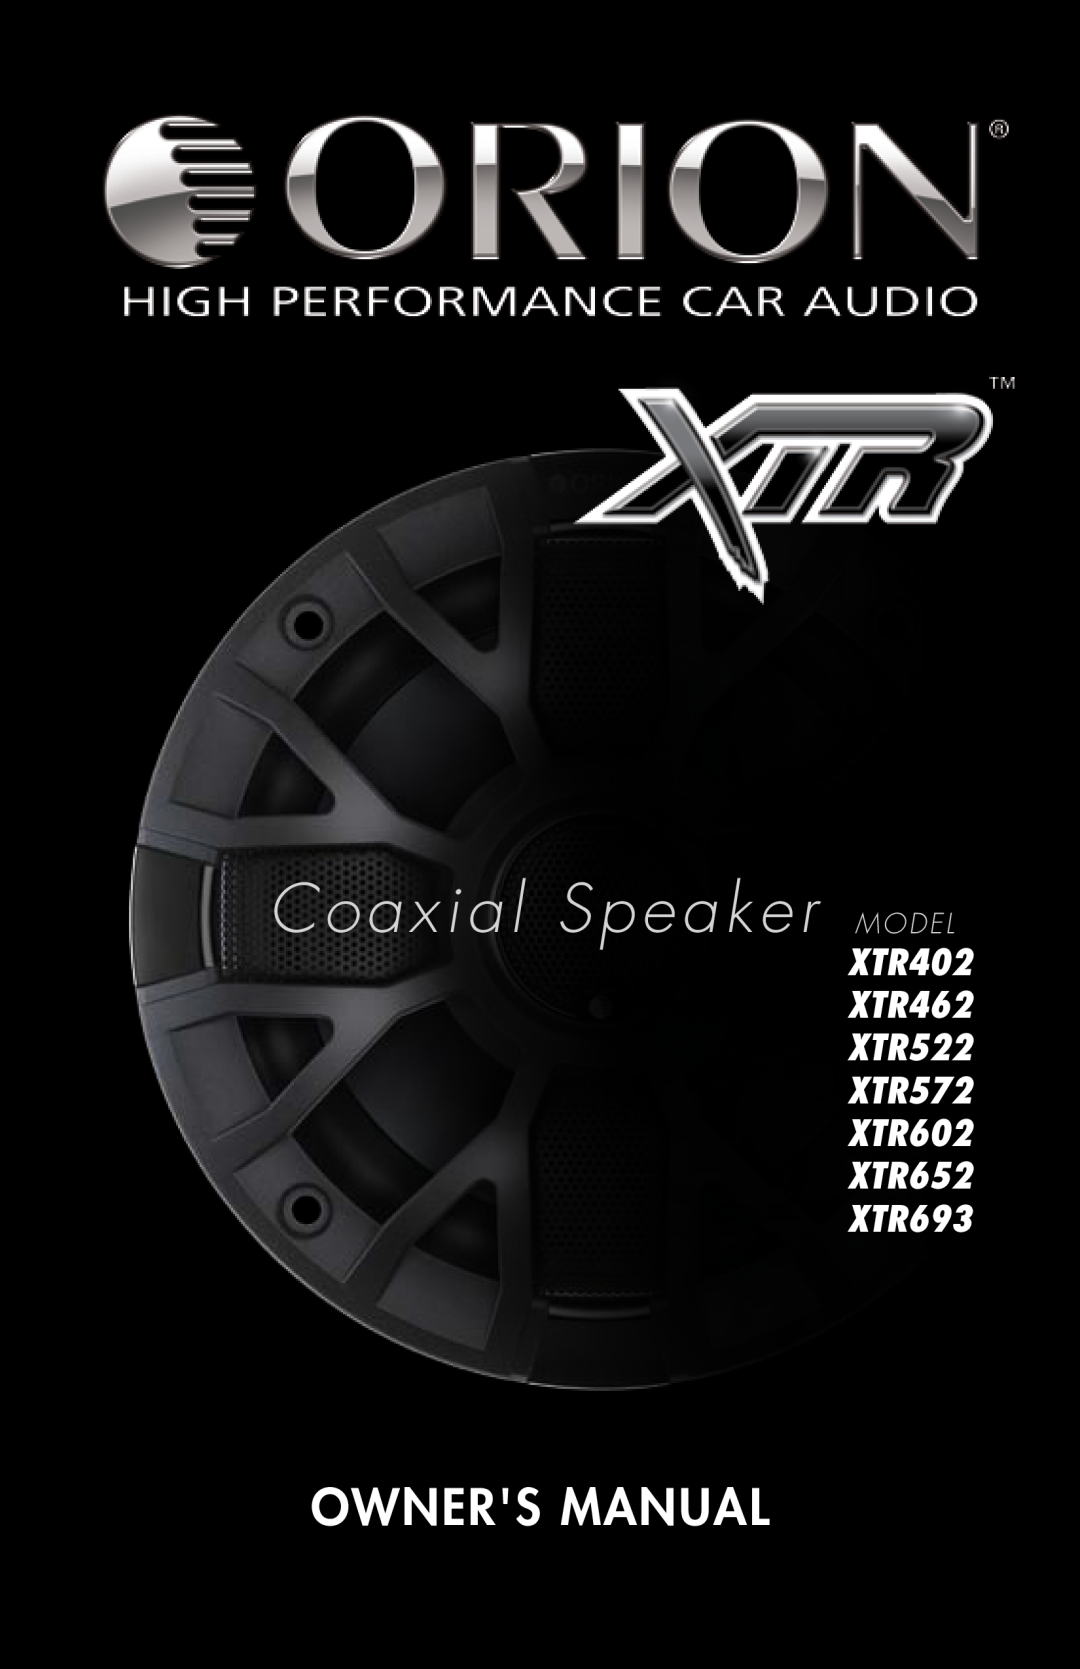 Orion Car Audio owner manual Coaxial Speaker MODEL, Owners Manual, XTR402 XTR462 XTR522 XTR572 XTR602 XTR652 XTR693 